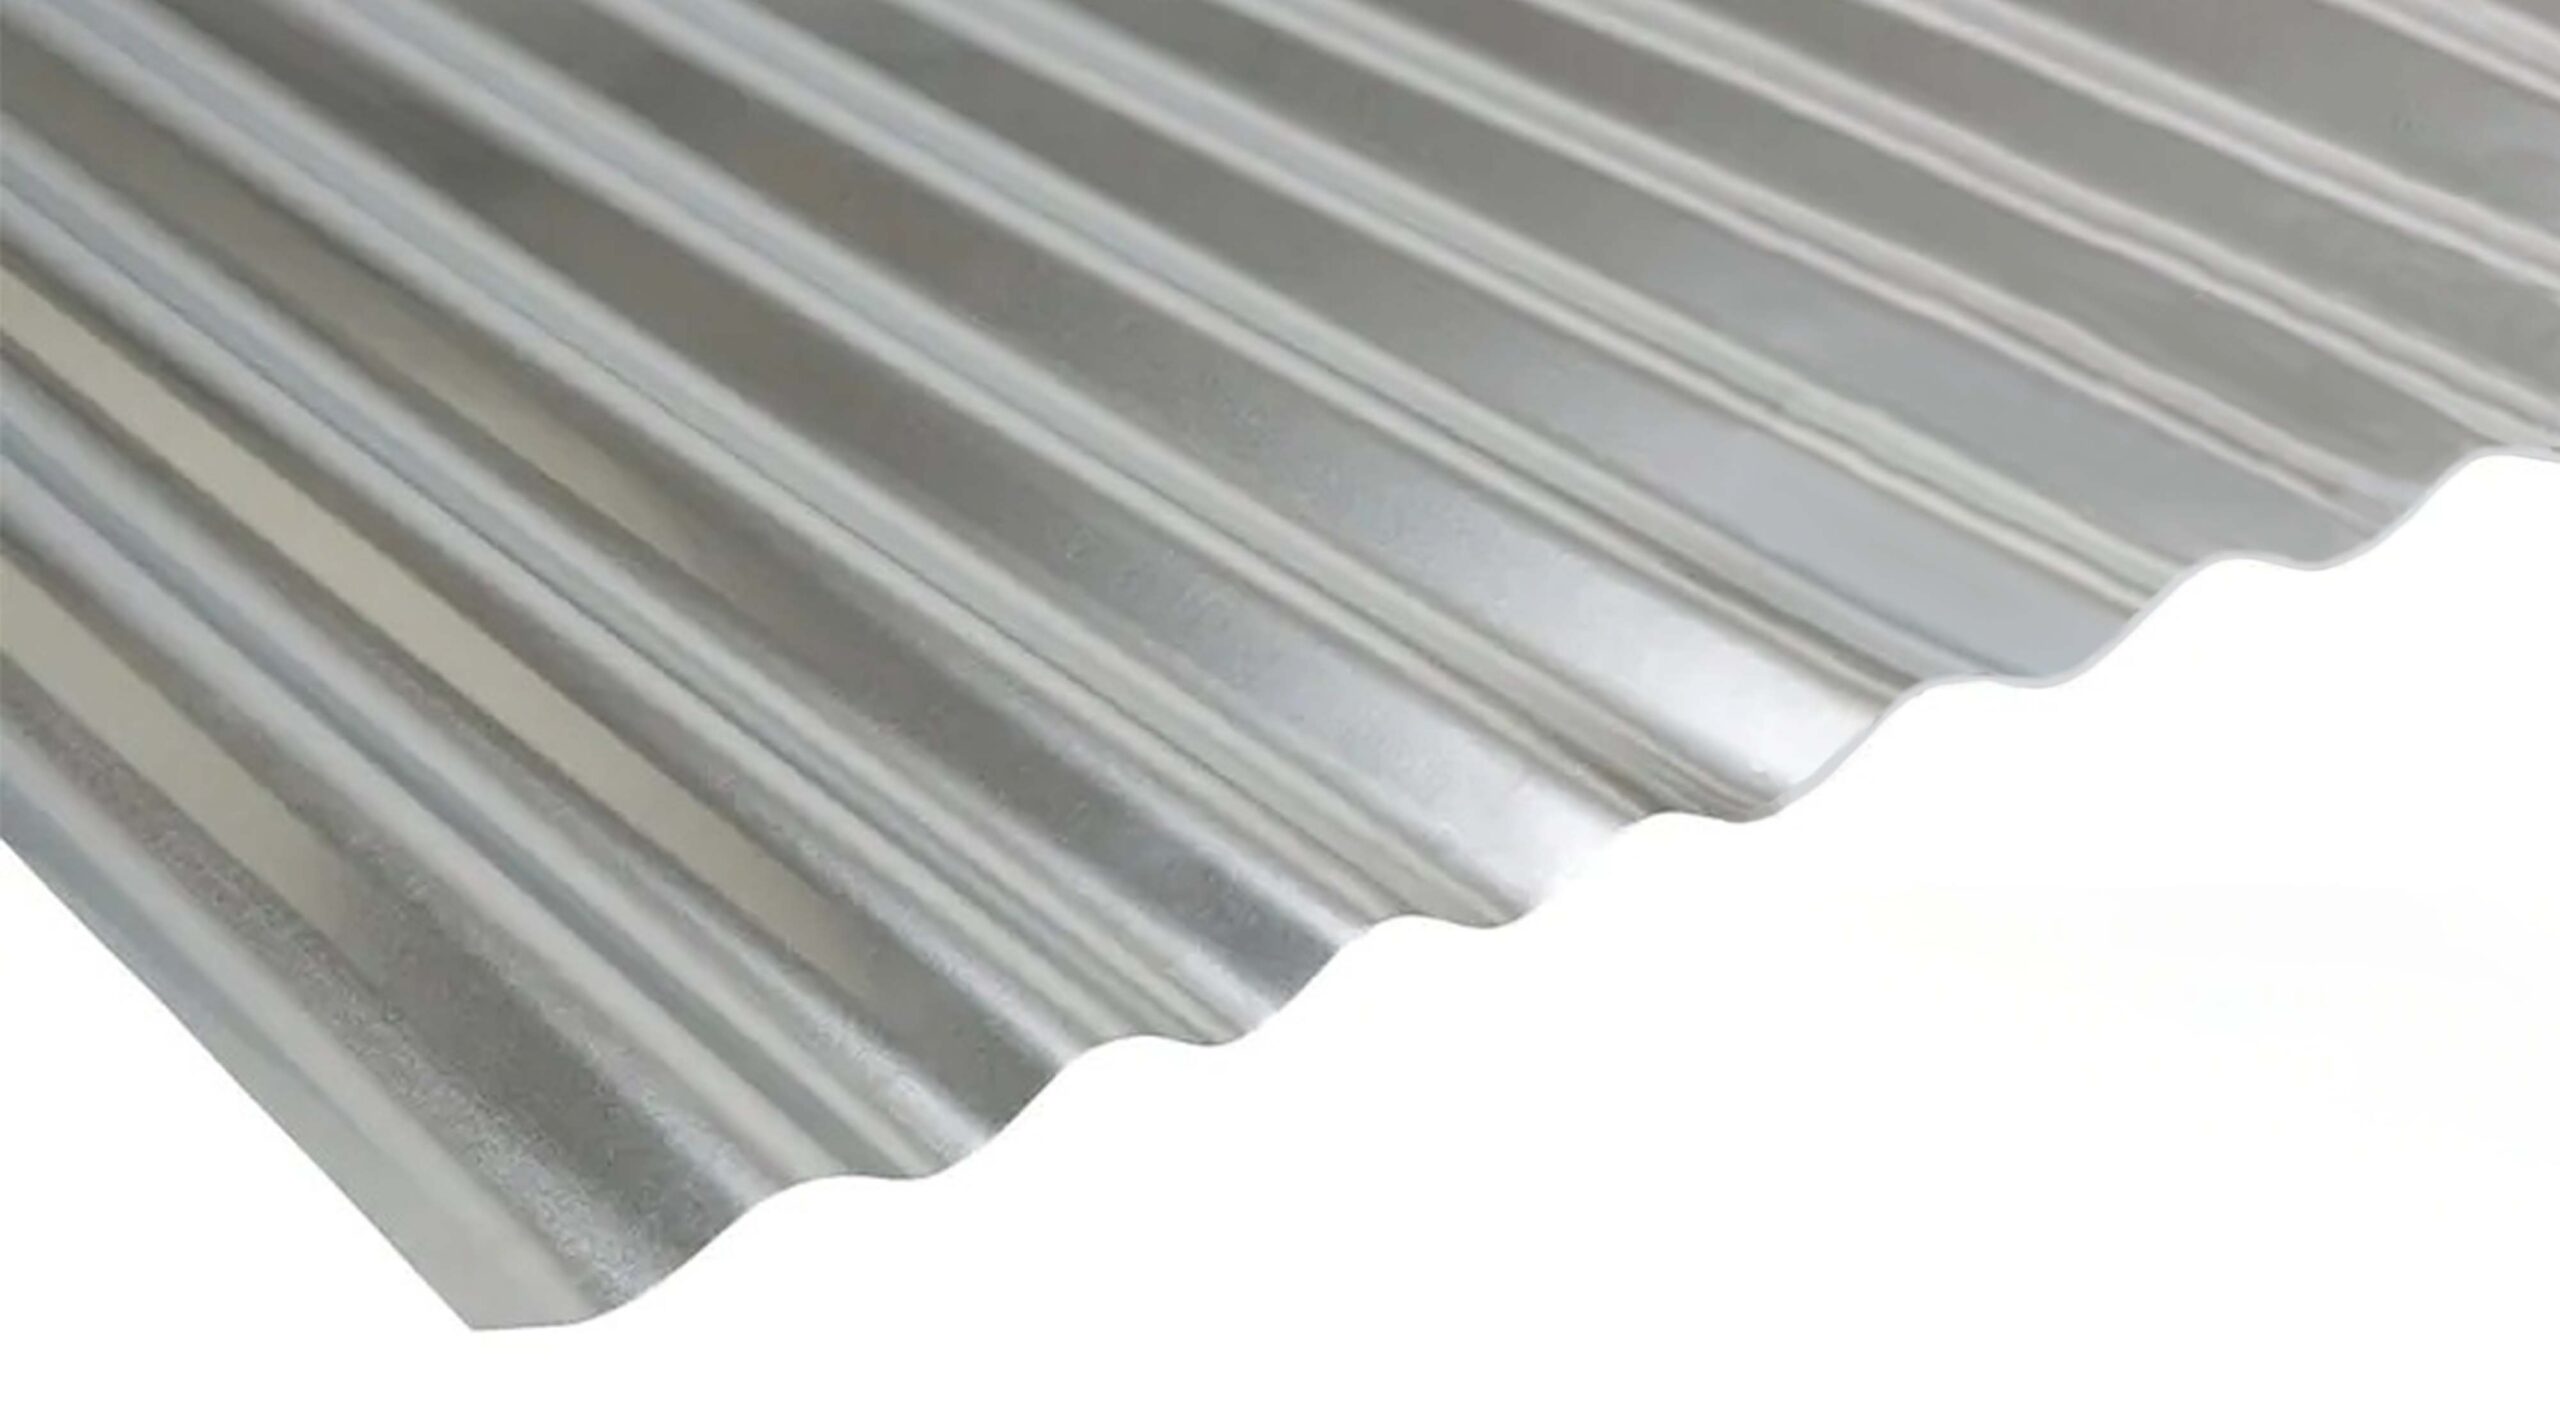 Example of mini corrugated bare galvanized metal offered by Heartland Metal and Building Supplies in Marion, Illinois